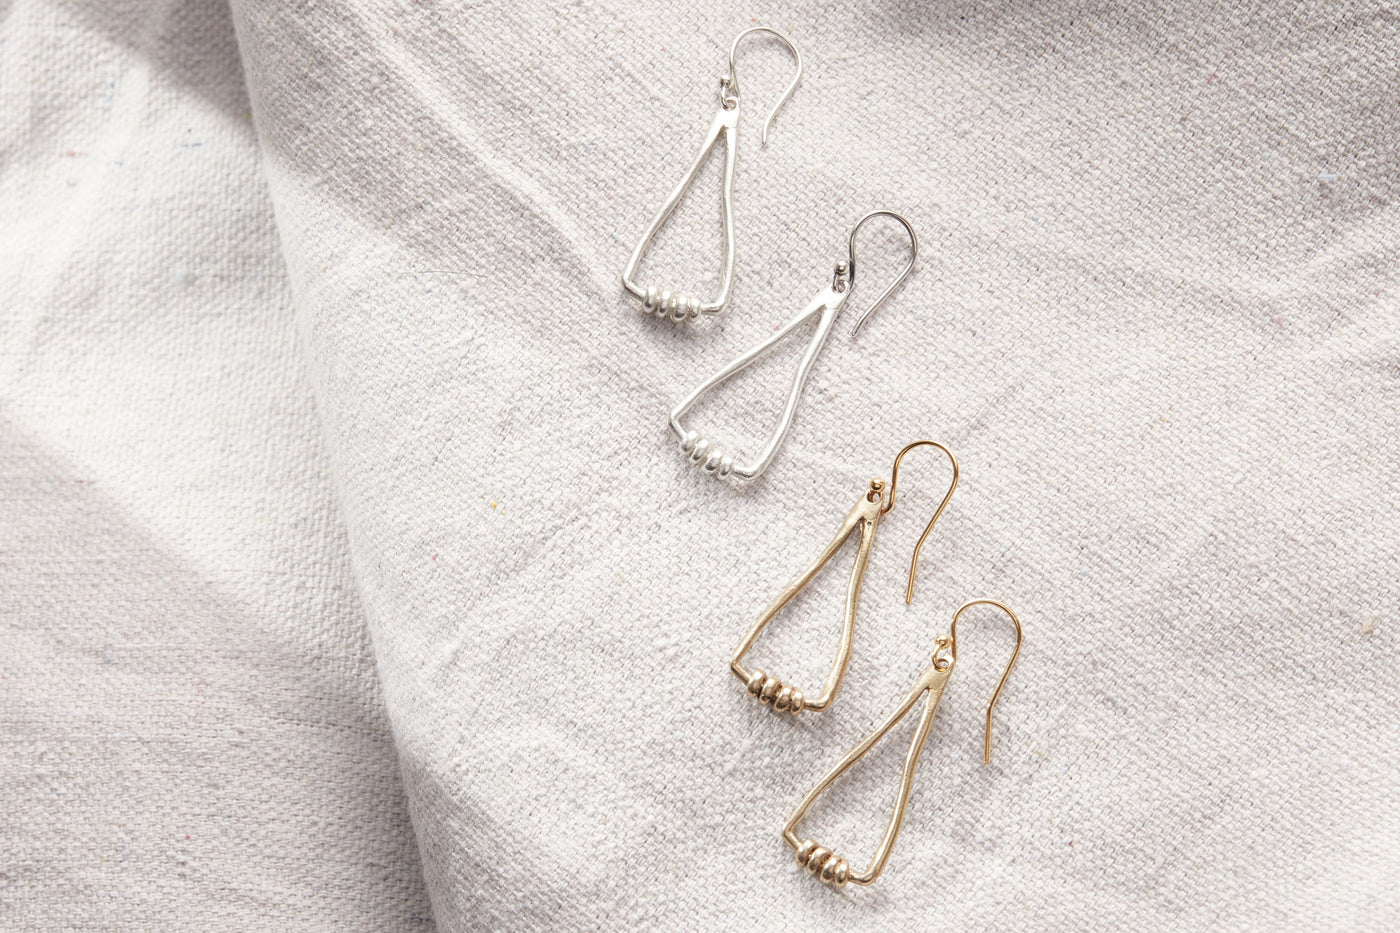 Kristen Mara EARRINGS 101: Effortless everyday styling is easy with a fabulous collection of staple earrings